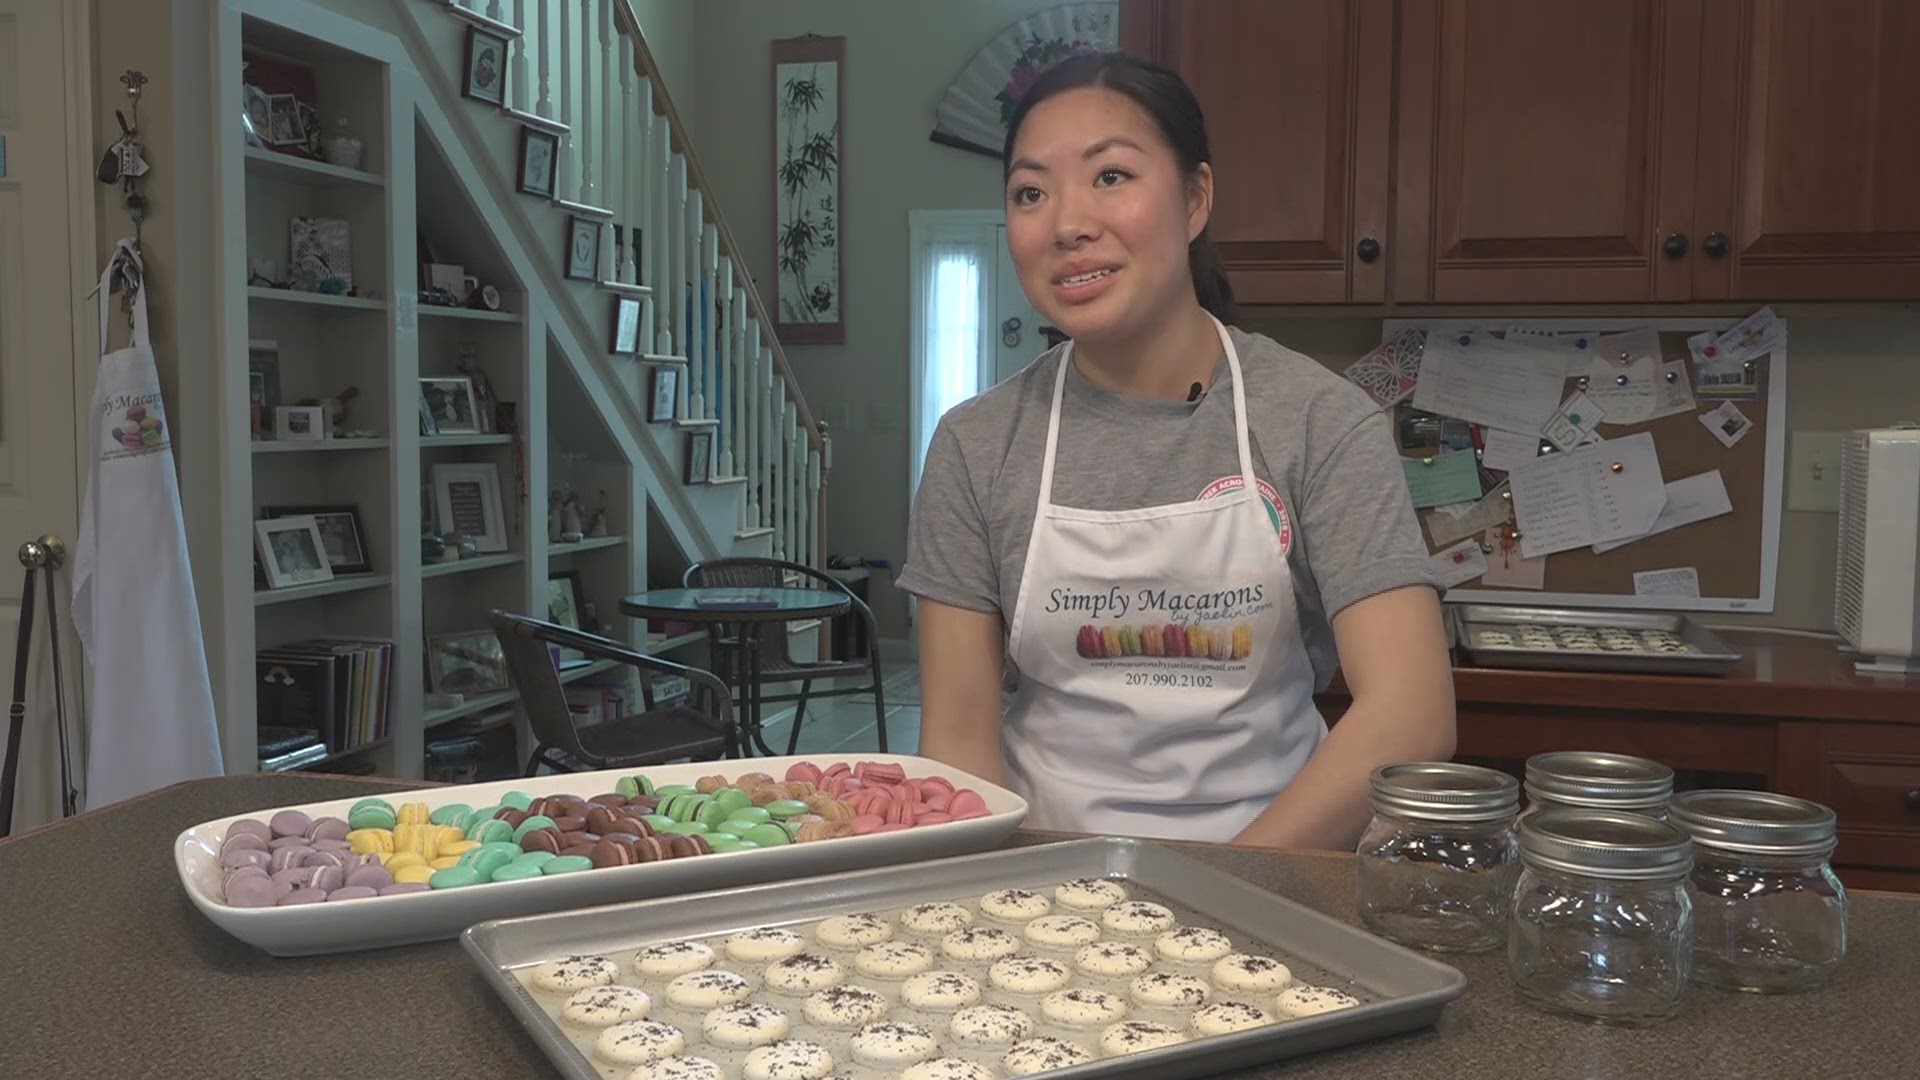 The most interesting part about Jaelin Roberts' "Simply Macarons" business may be what she's doing with her profits.